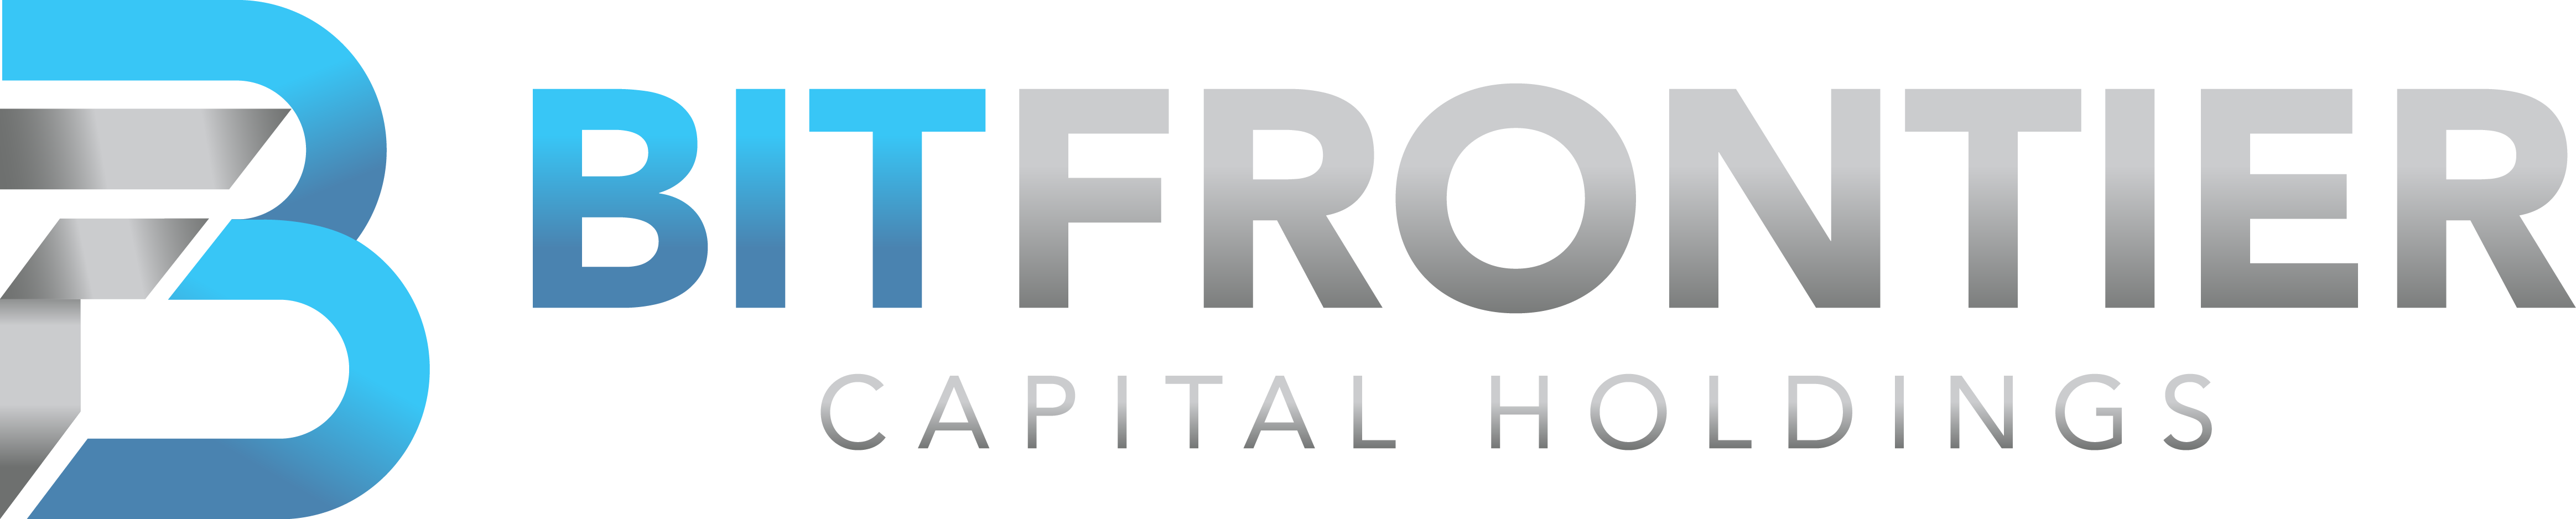 BitFrontier Capital Holdings (1).png